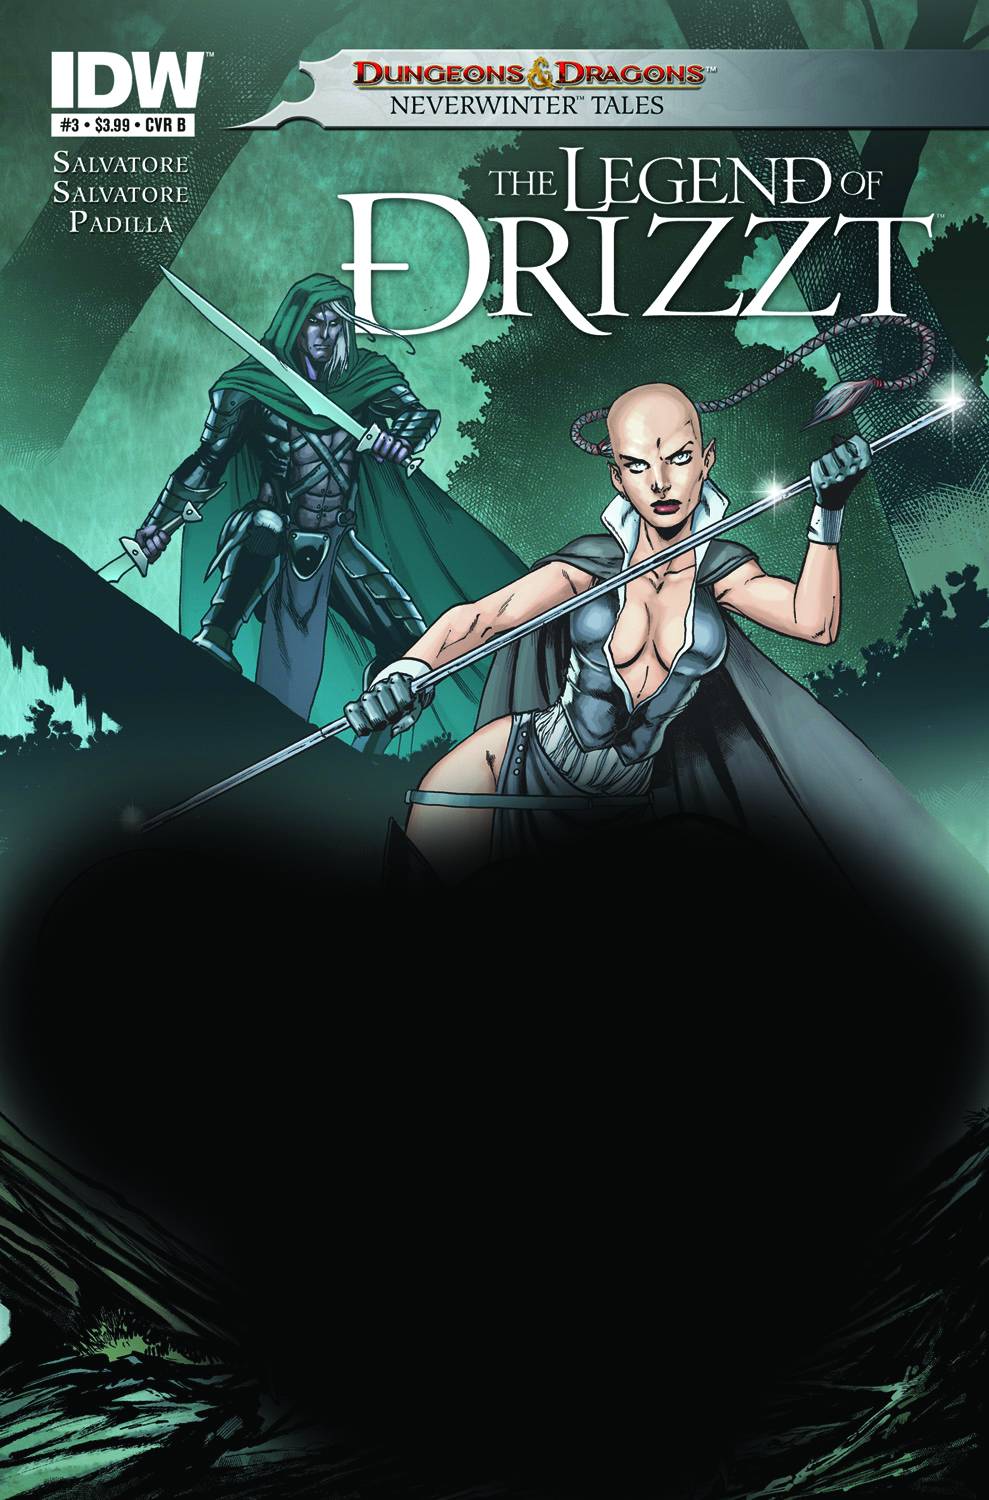 Dungeons & Dragons Drizzt #3